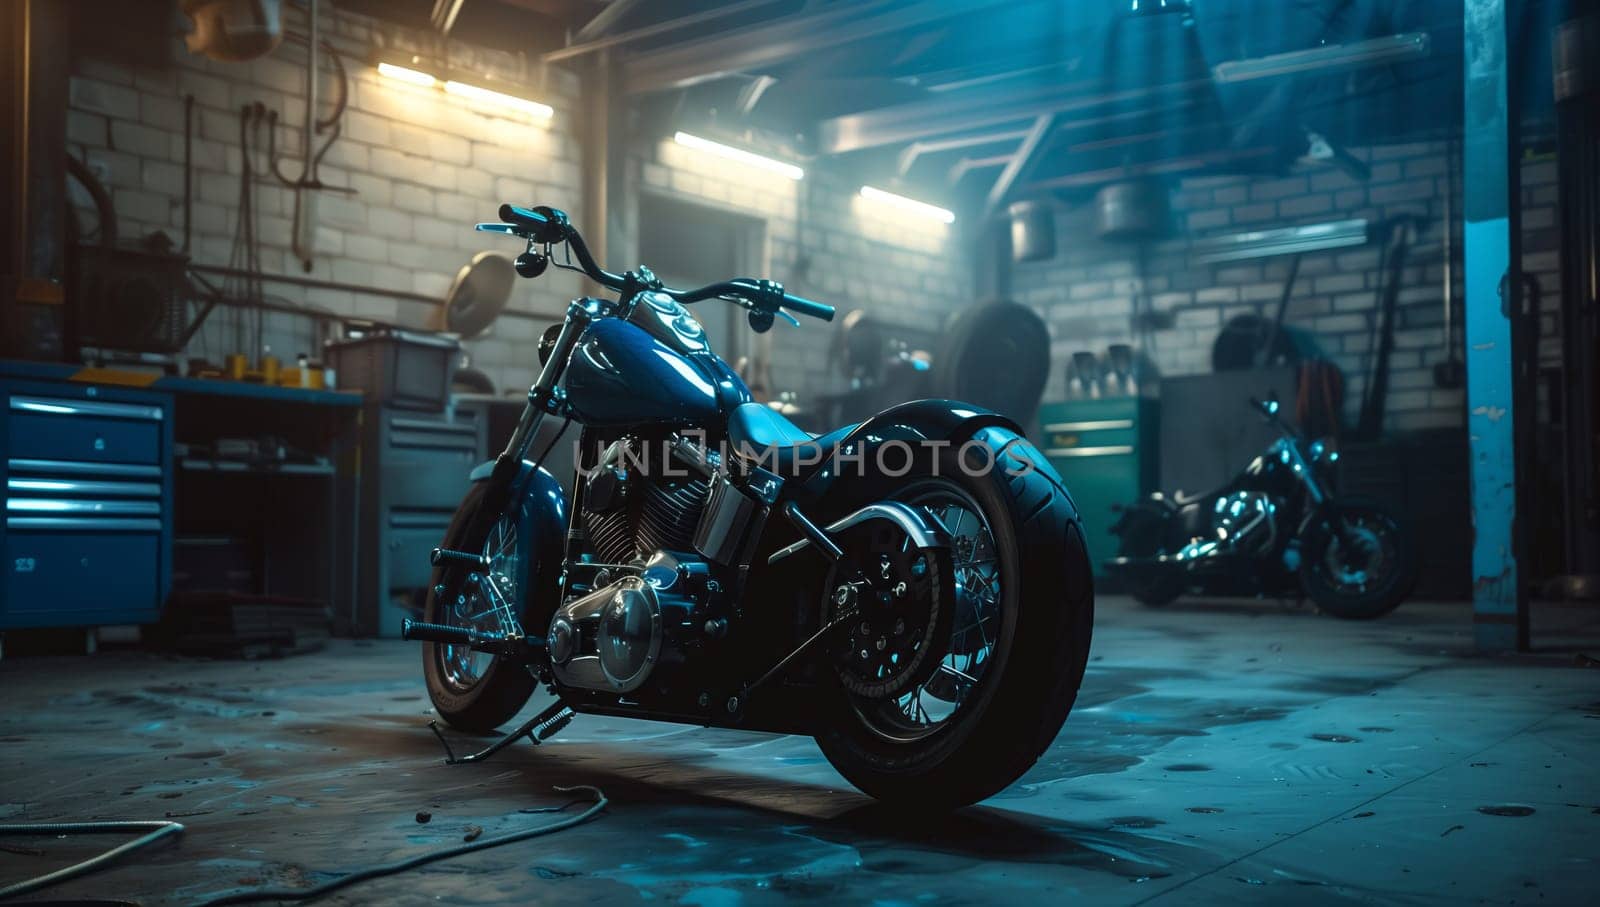 A blue motorcycle with automotive lighting is parked in a dark garage, its automotive tires resting on the cold concrete floor